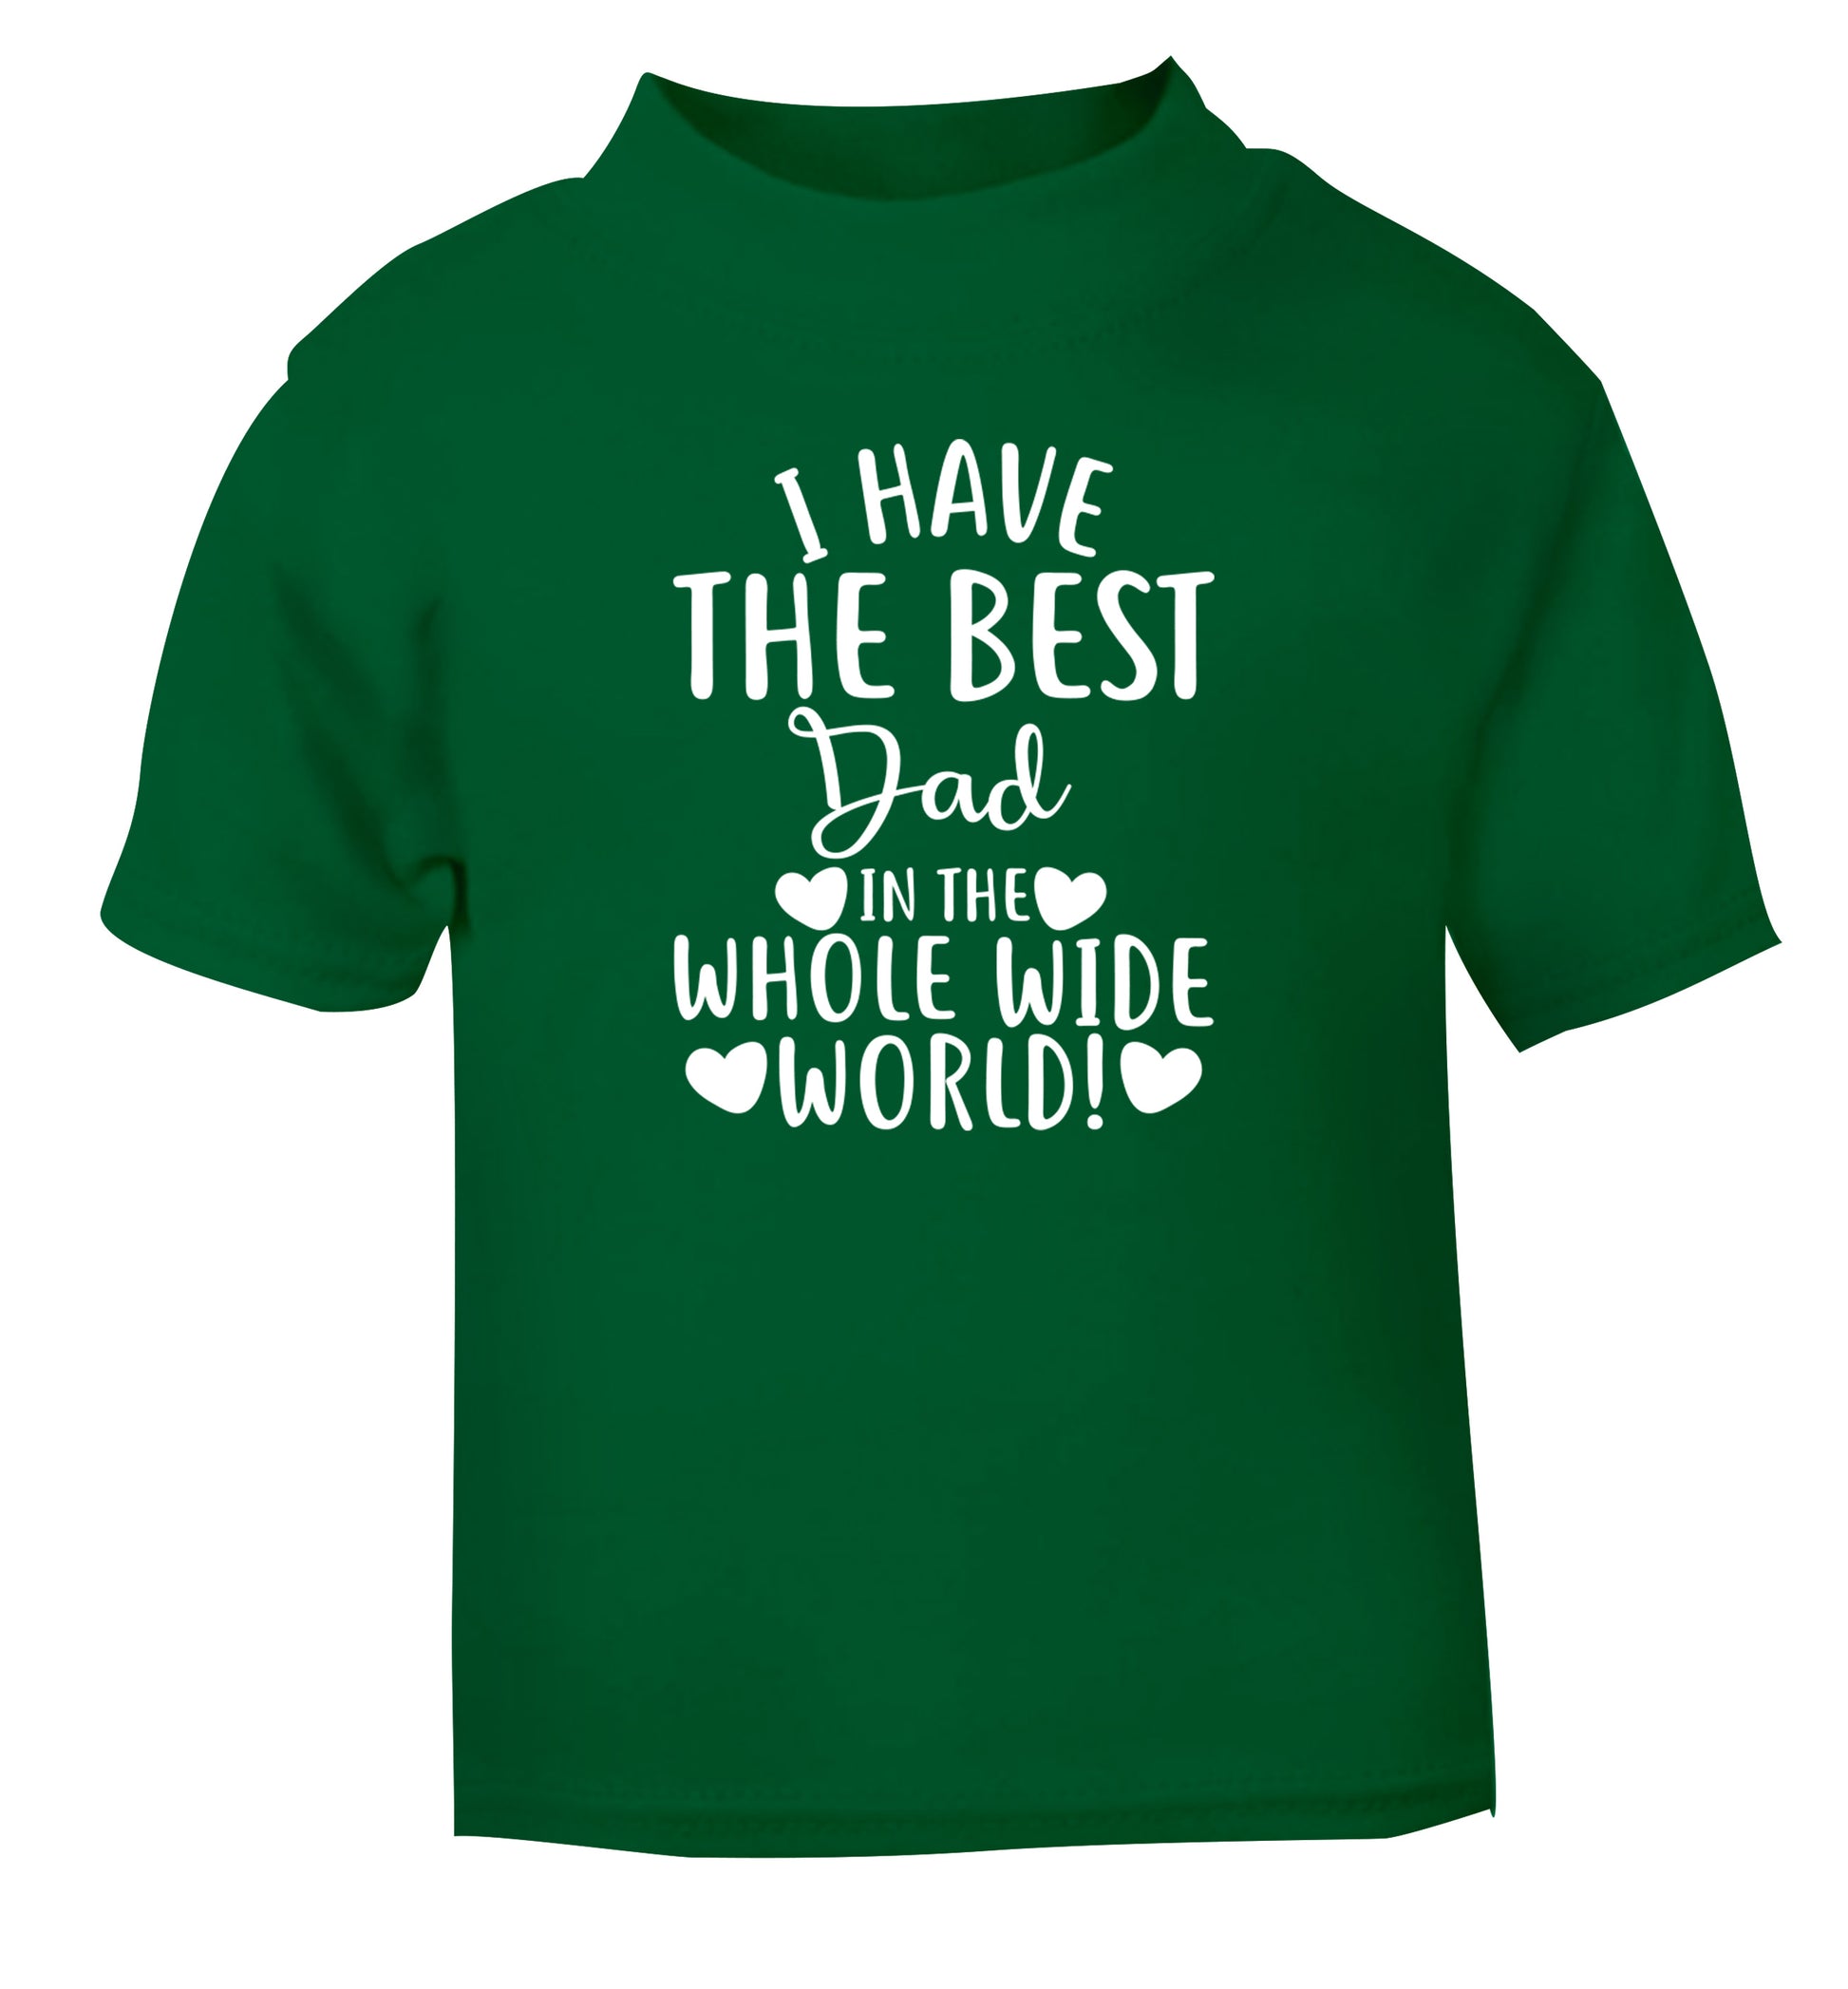 I have the best dad in the whole wide world! green Baby Toddler Tshirt 2 Years